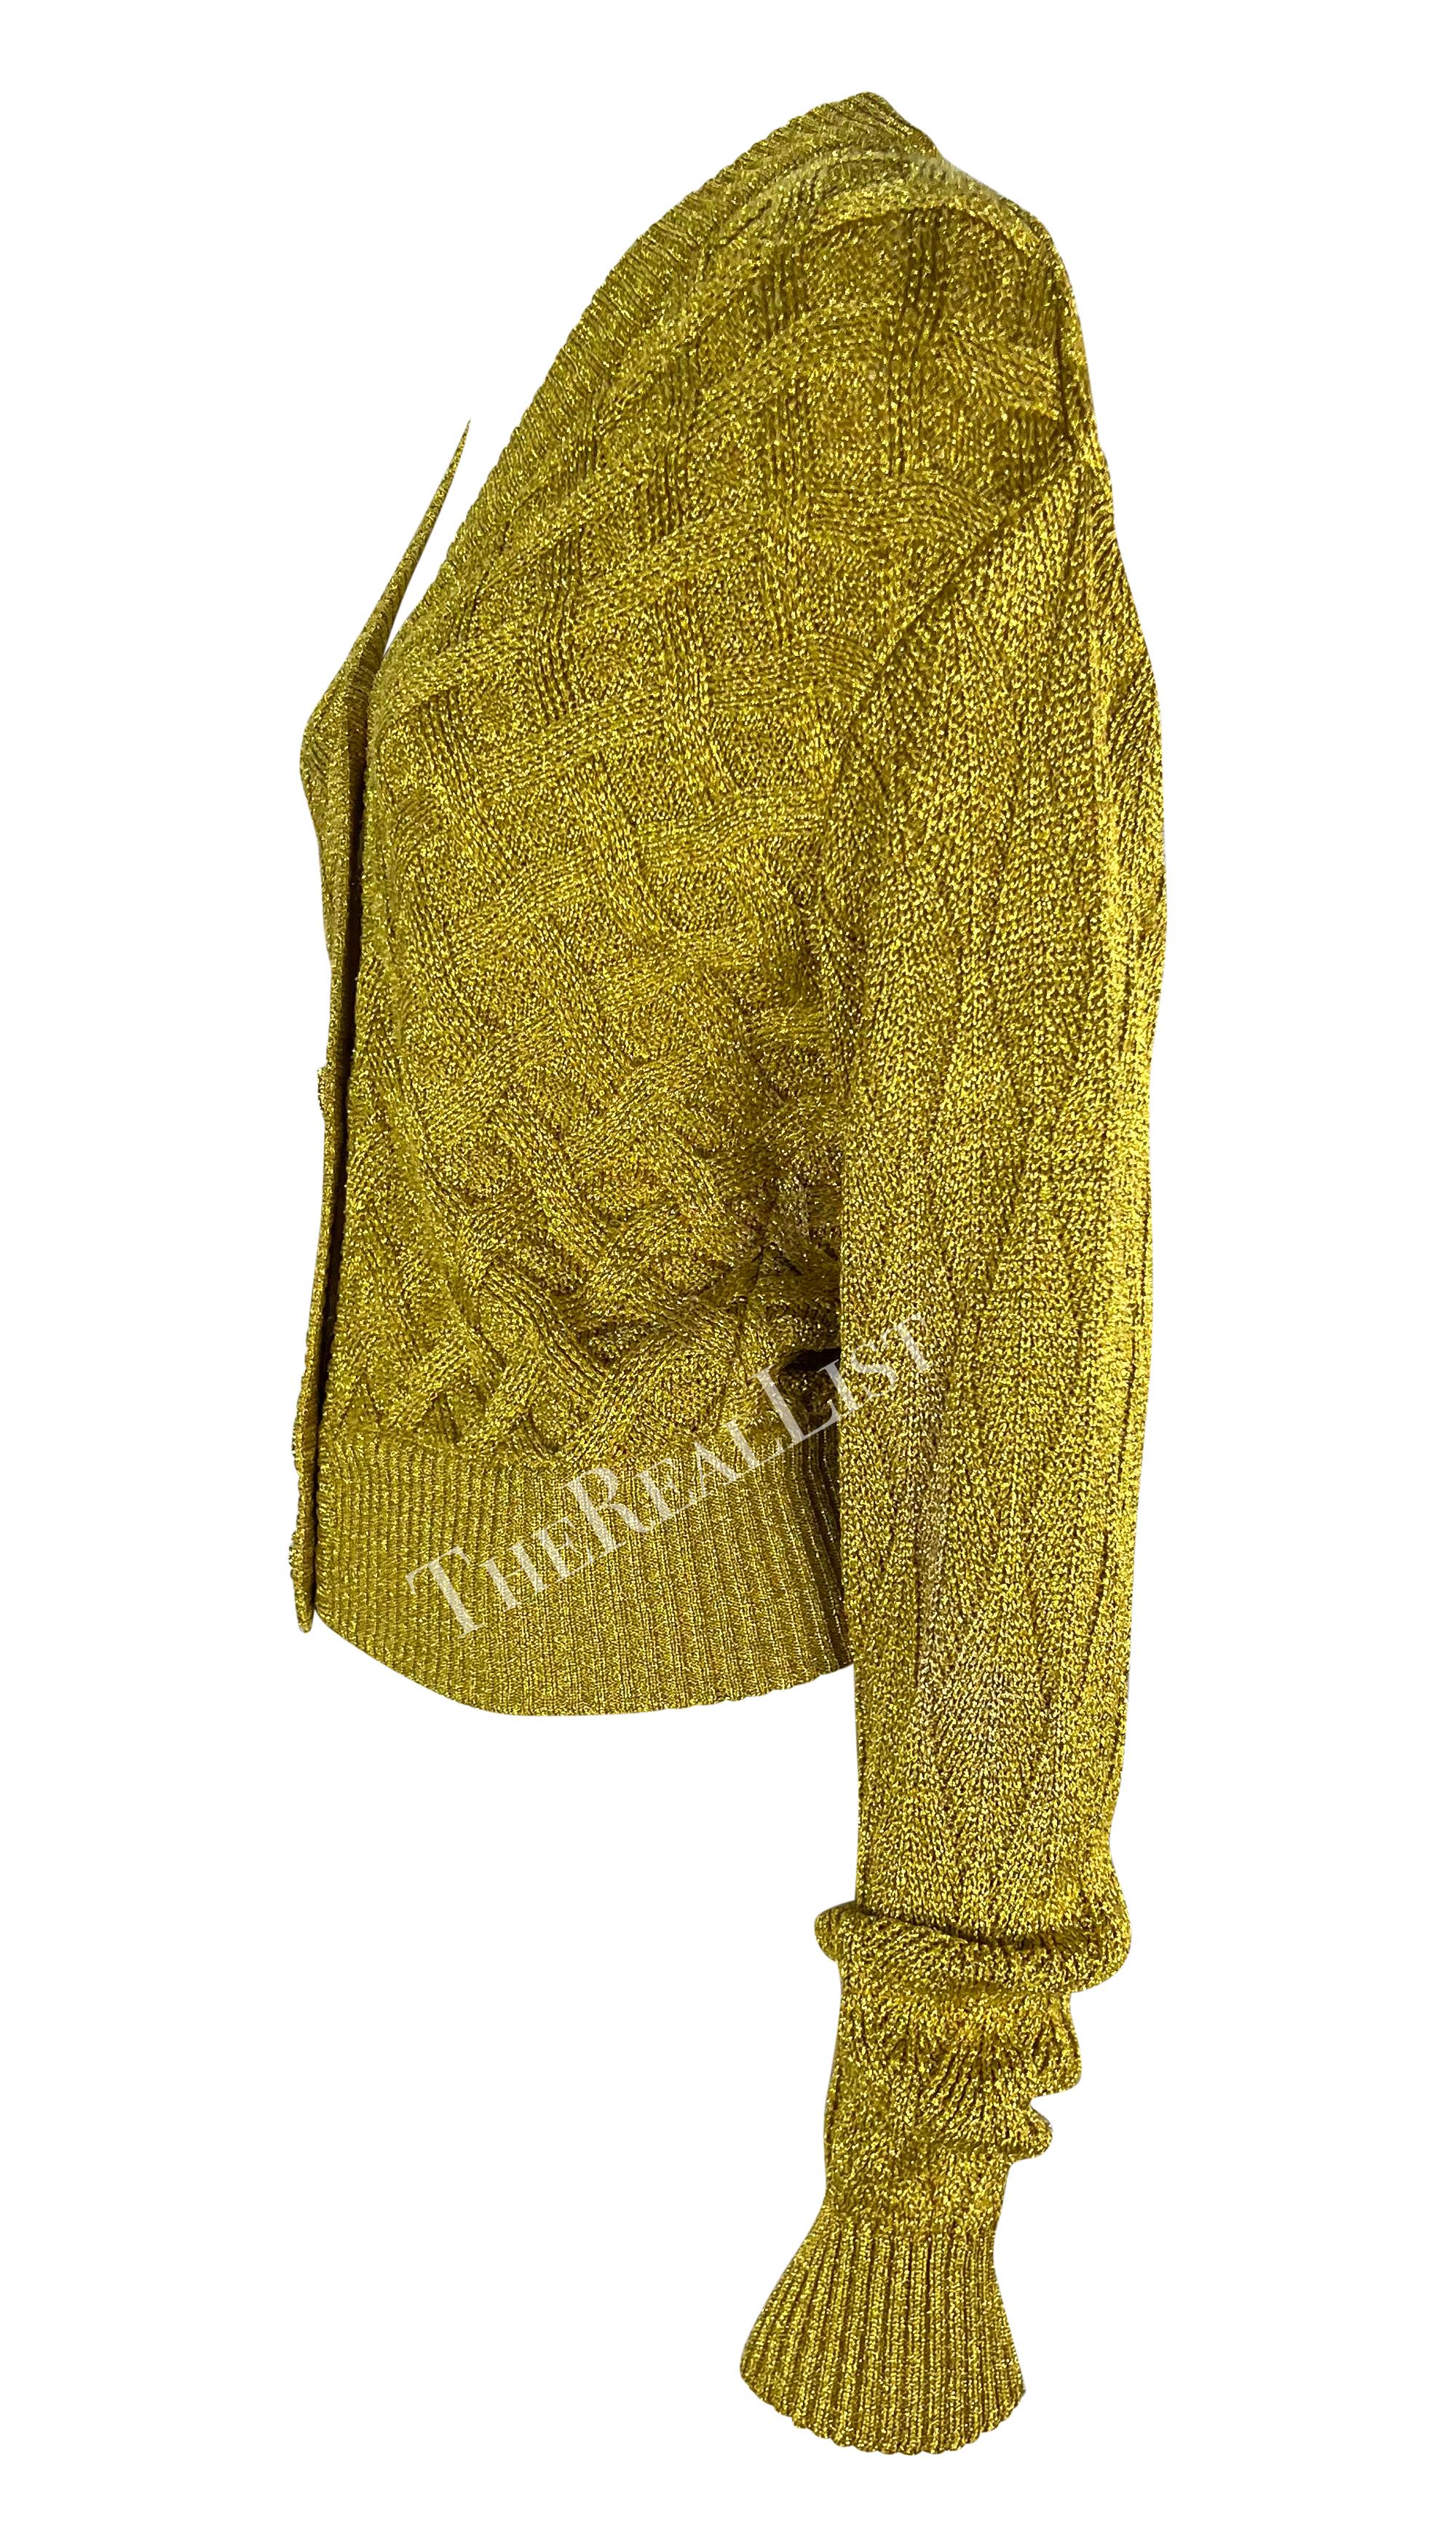 F/W 1992 Atelier Versace Gold Metallic Cable Knit Cardigan Sweater In Good Condition For Sale In West Hollywood, CA